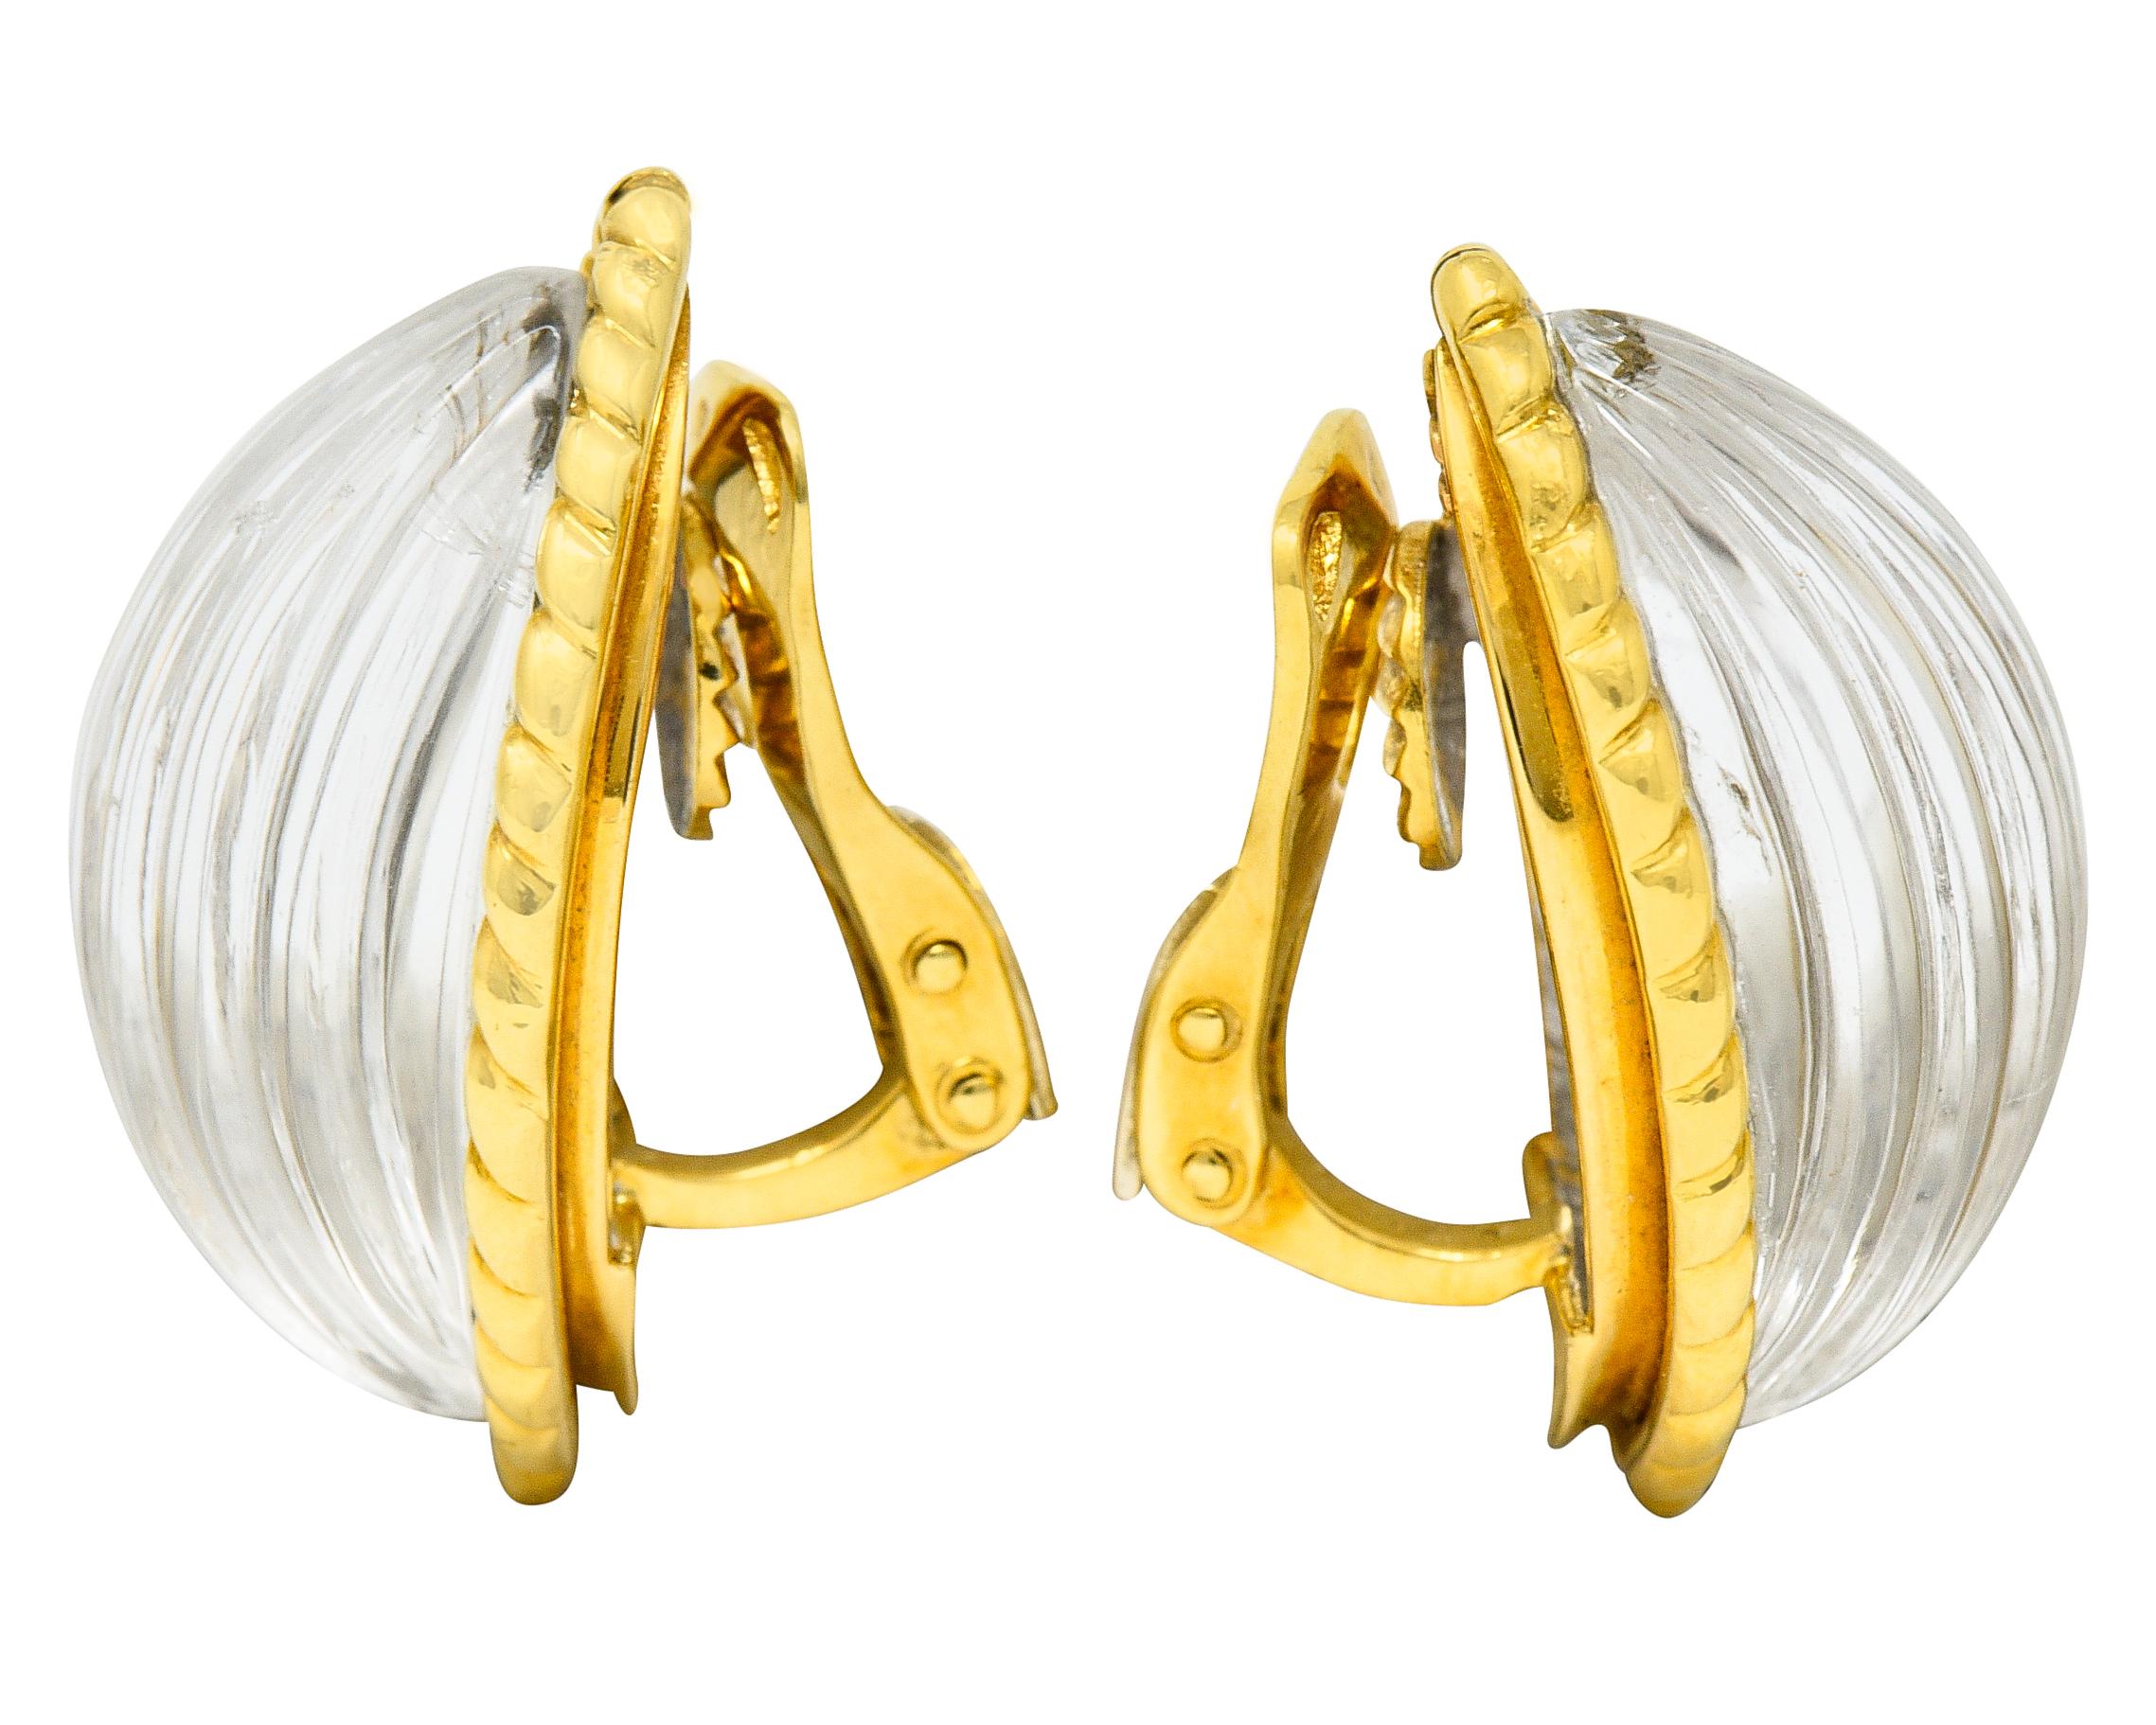 Navette shaped earrings center highly domed rock crystal quartz cabochons

Transparent and deeply carved with a fluted design

Bezel set in a twisted rope surround

Completed by hinged omega backs

French assay marks for 18 karat gold

Fully signed